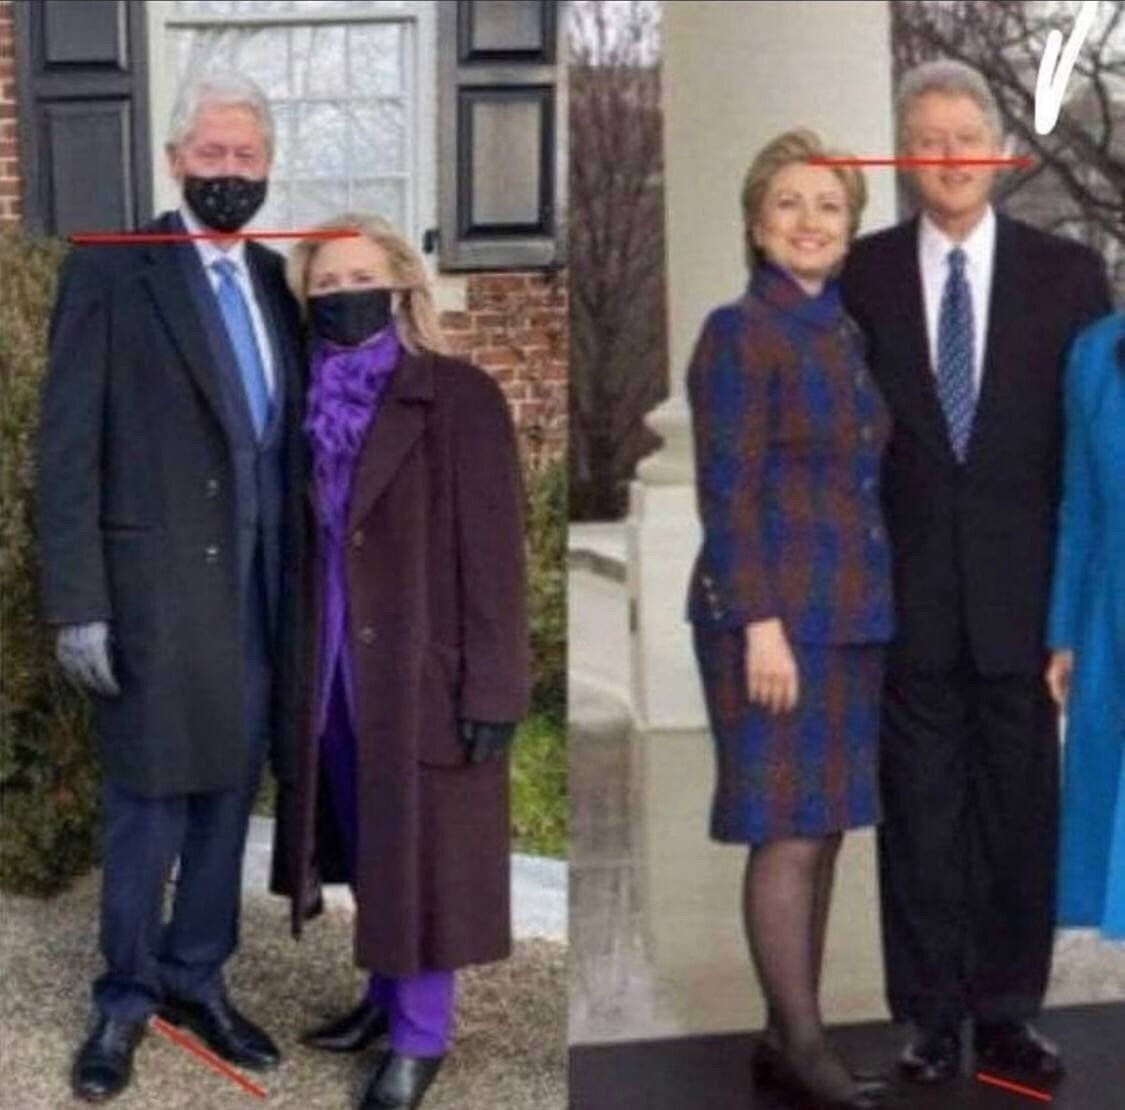 Real Hillary and fake Hillary different heights